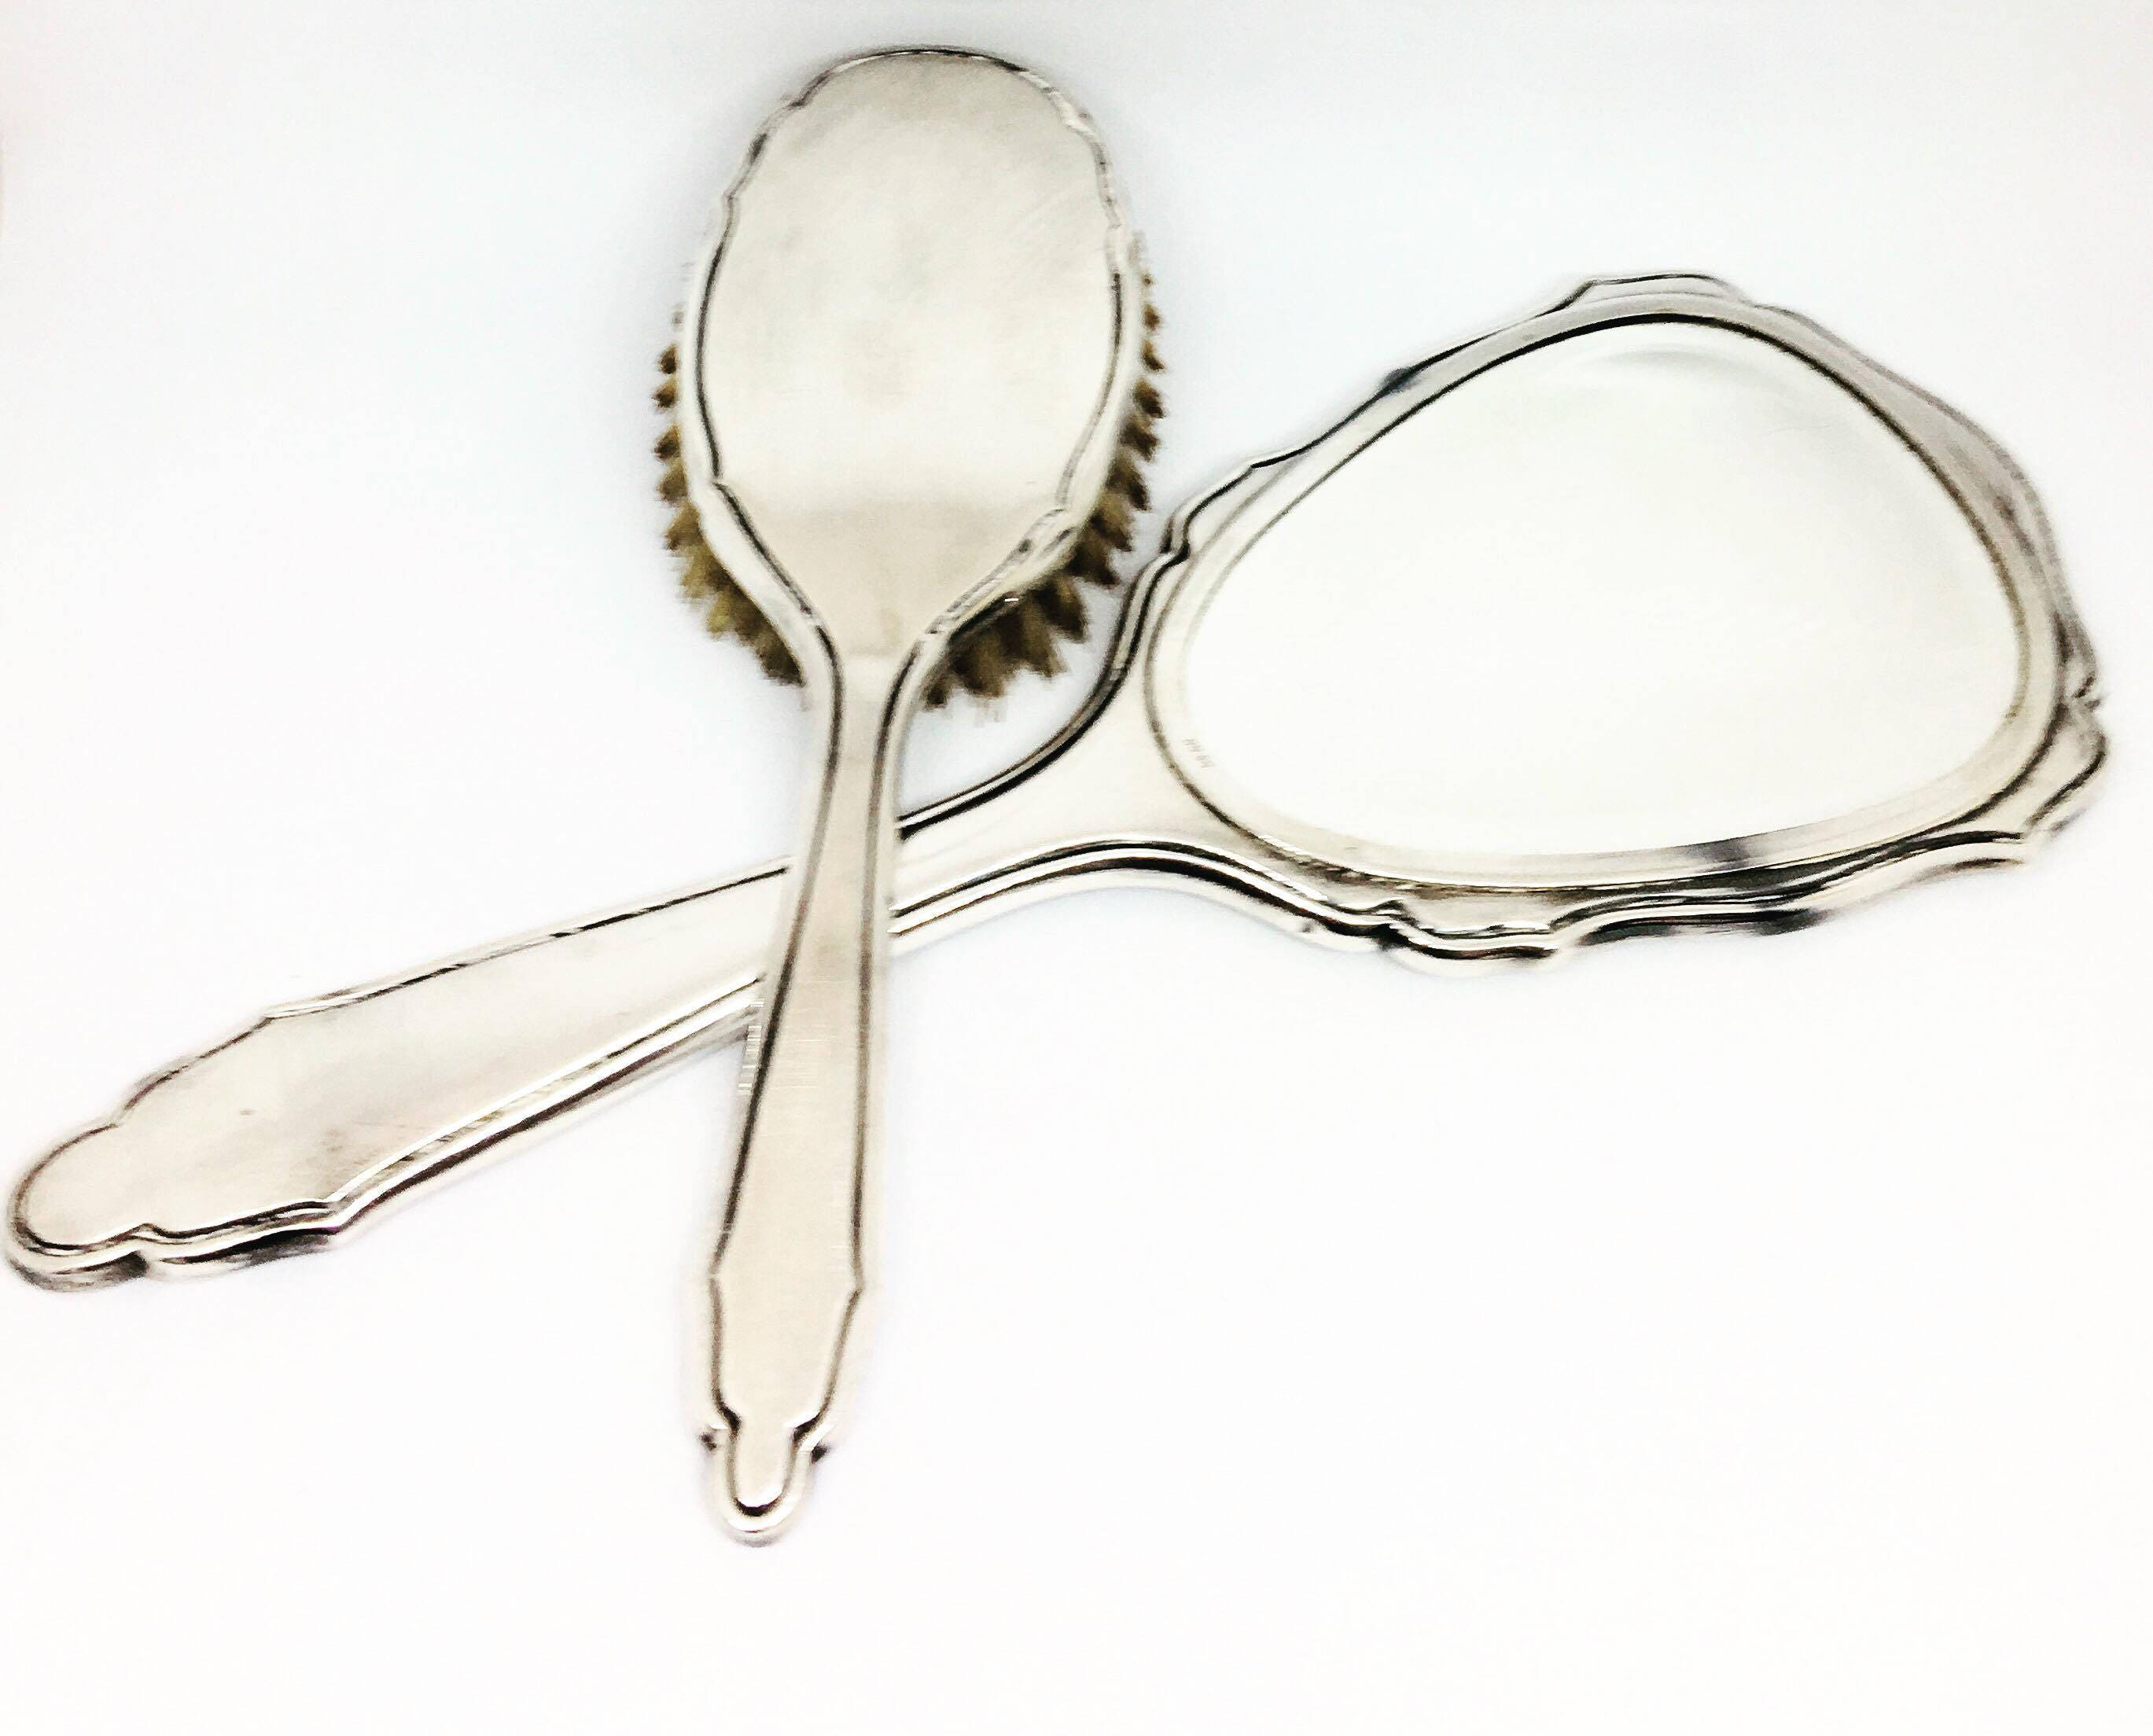 Silver Plated Vanity Set Brush And Hand Mirror Vintage Matched